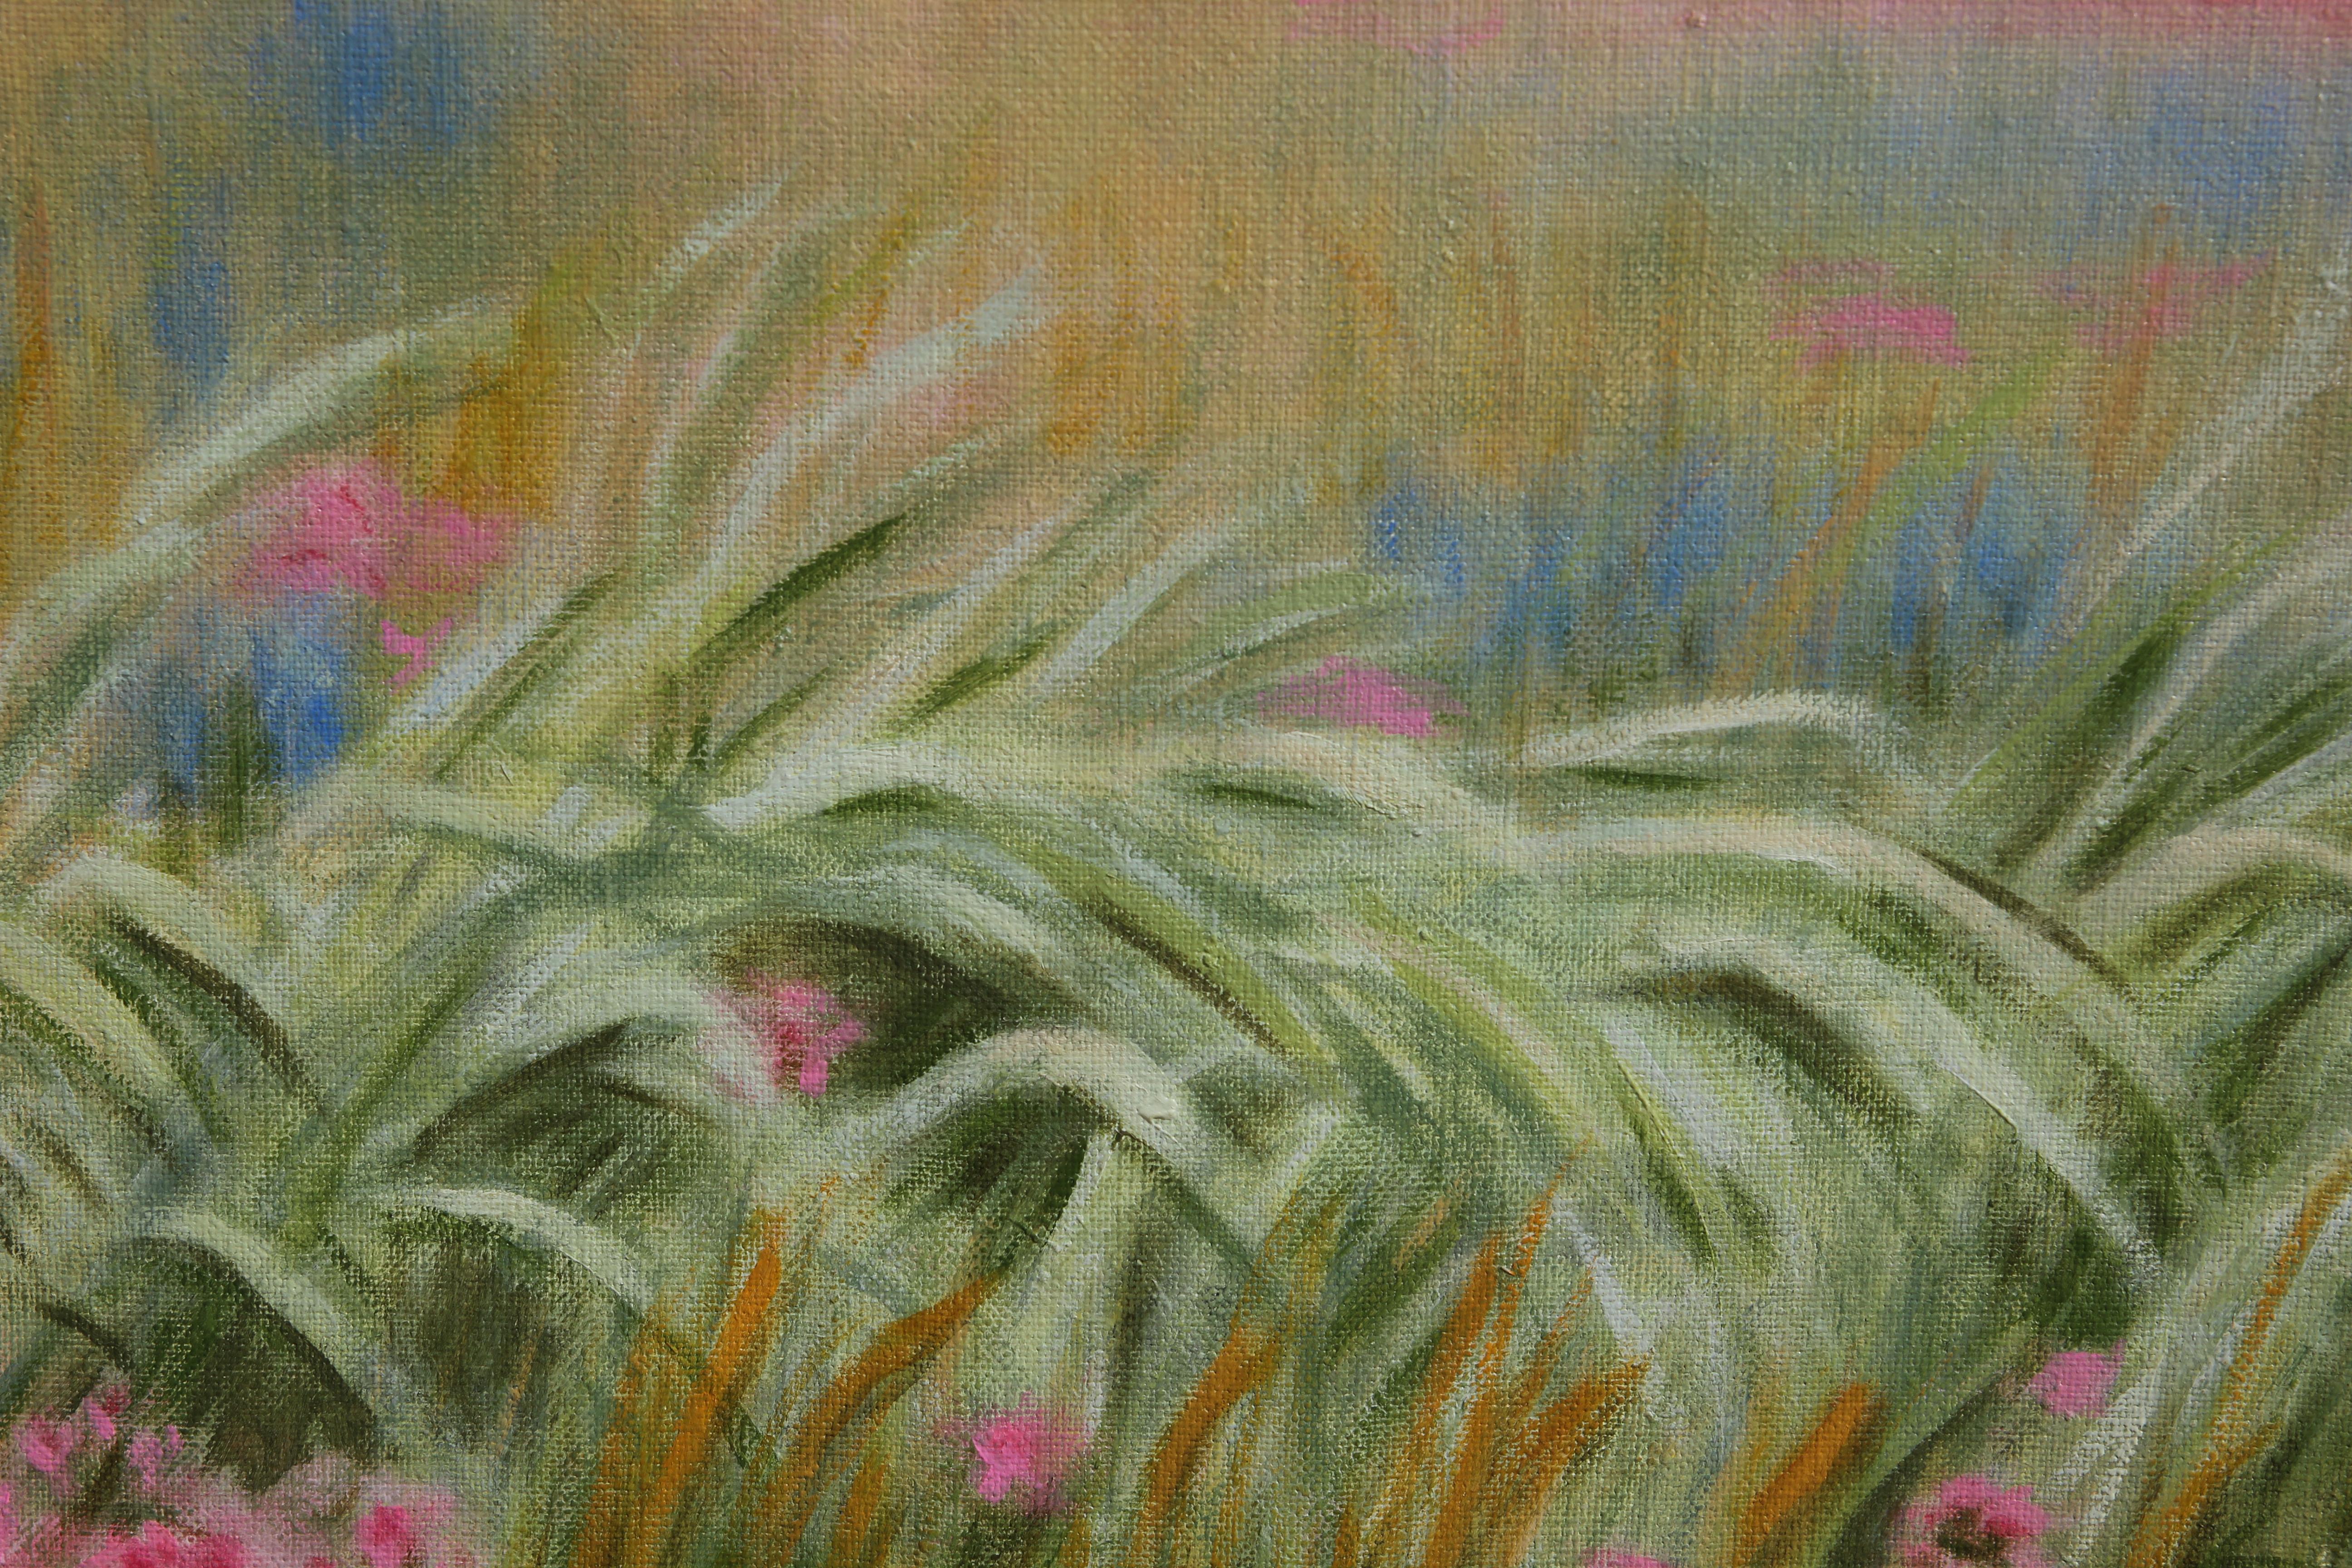 Naturalistic Landscape painting of a field with flowers and tall grass. In the distant background is a line of trees with a house hidden in the background. The work is signed and dated by the artist and titled on the back of the canvas. The canvas